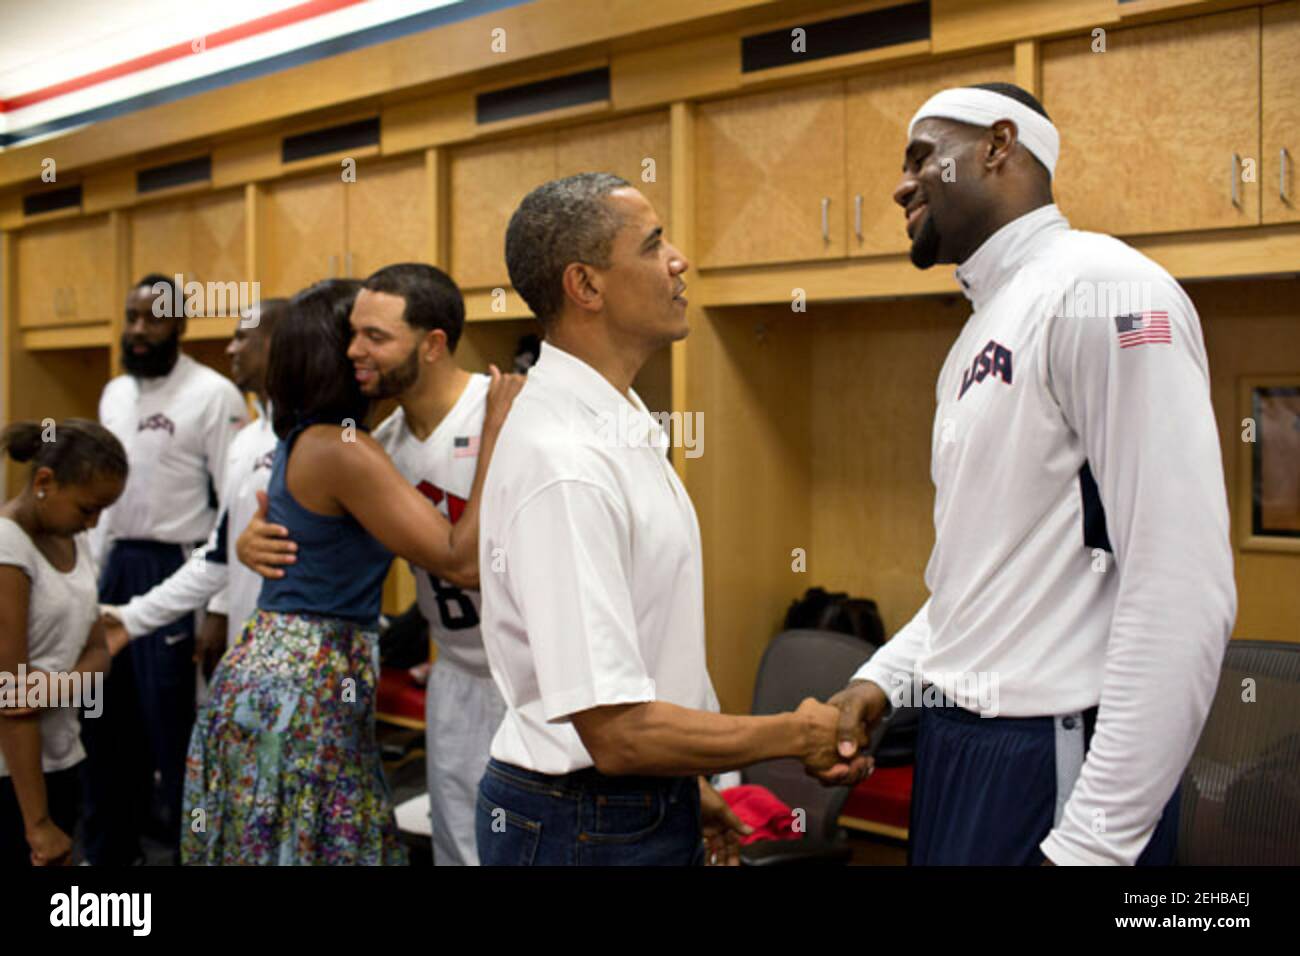 President Barack Obama talks with LeBron James as First Lady Michelle Obama hugs Deron Williams during their greet with members of the U.S. Men's Olympic basketball team at halftime of their game against Brazil at the Verizon Center in Washington, D.C., July 16, 2012. Stock Photo